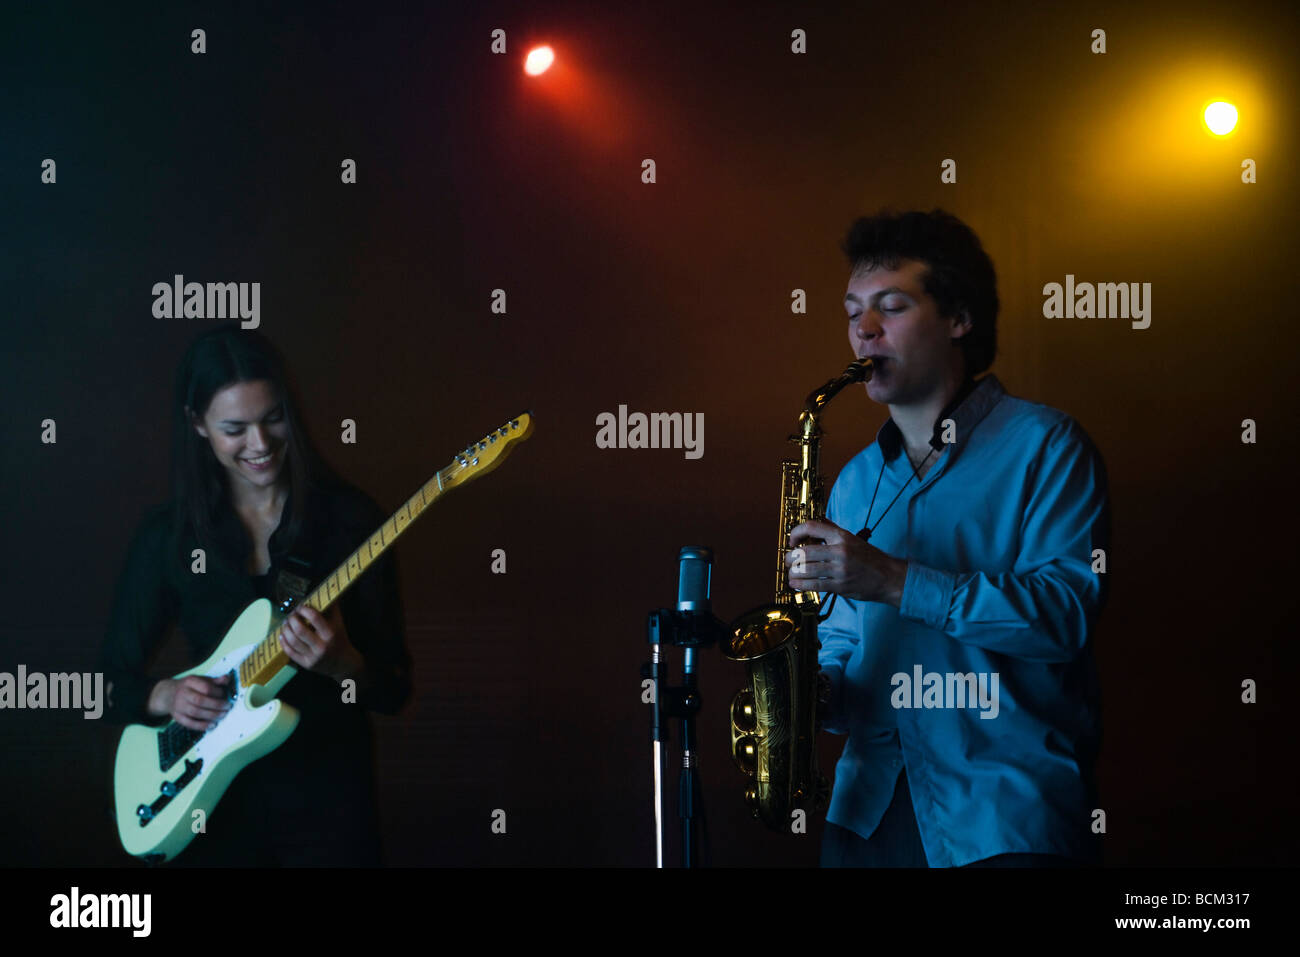 Young musicians playing electric guitar and saxophone in night club Stock Photo